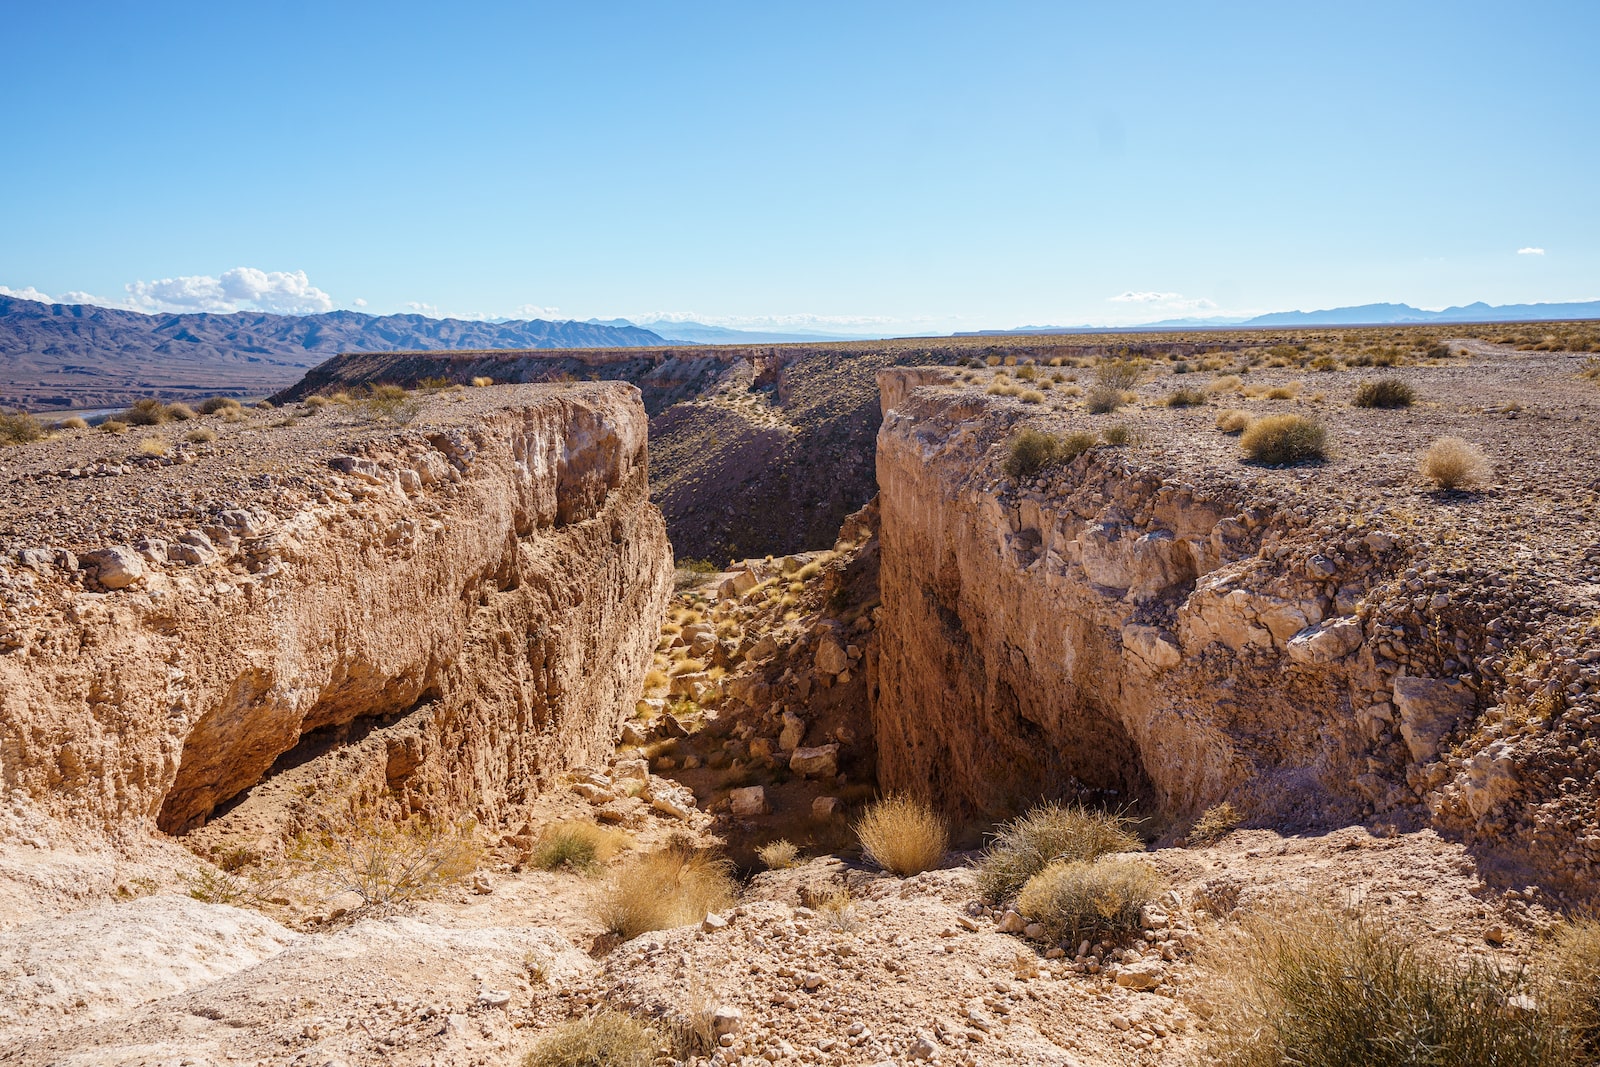 A desert scene with a narrow channel opening between two large sections of rock.